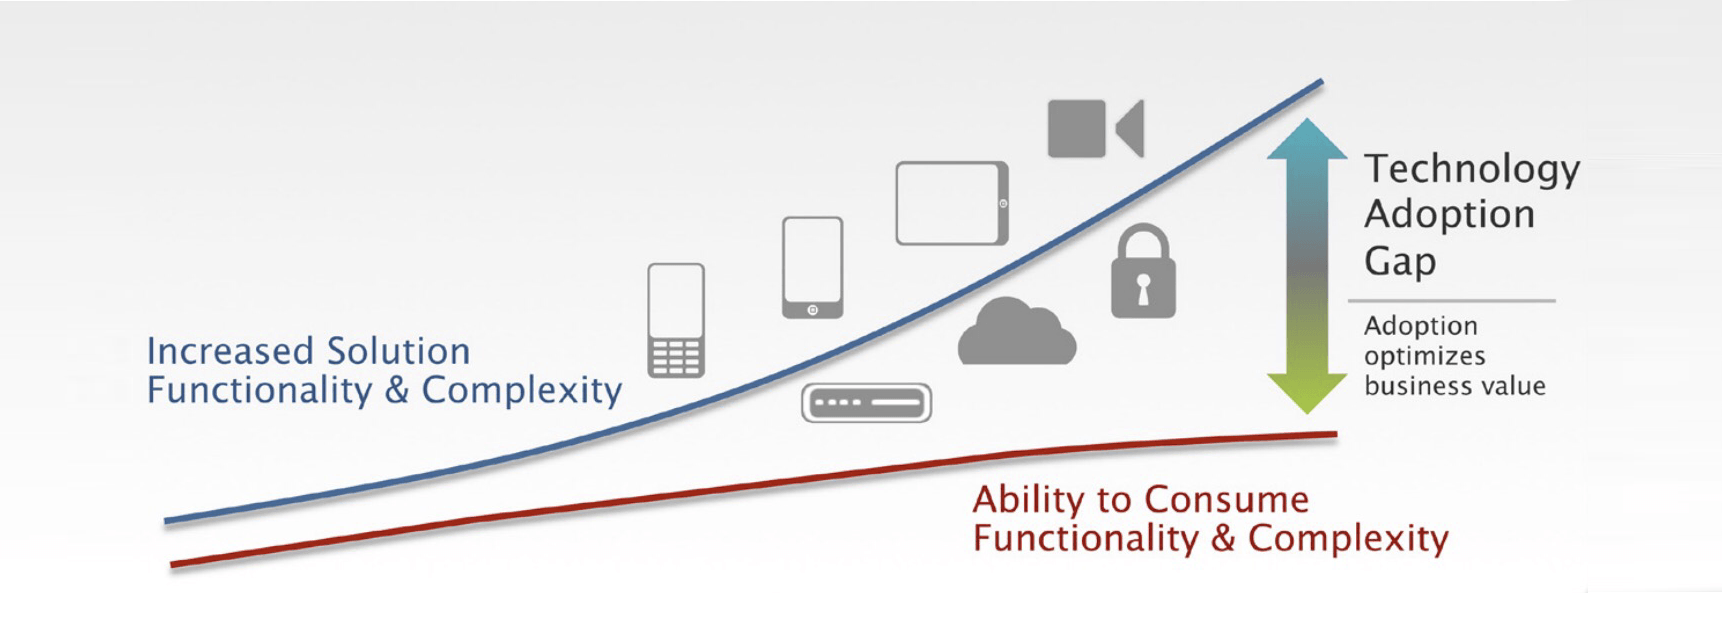 A diagram of a technology adoption cap and ability to consume functionality and complexity